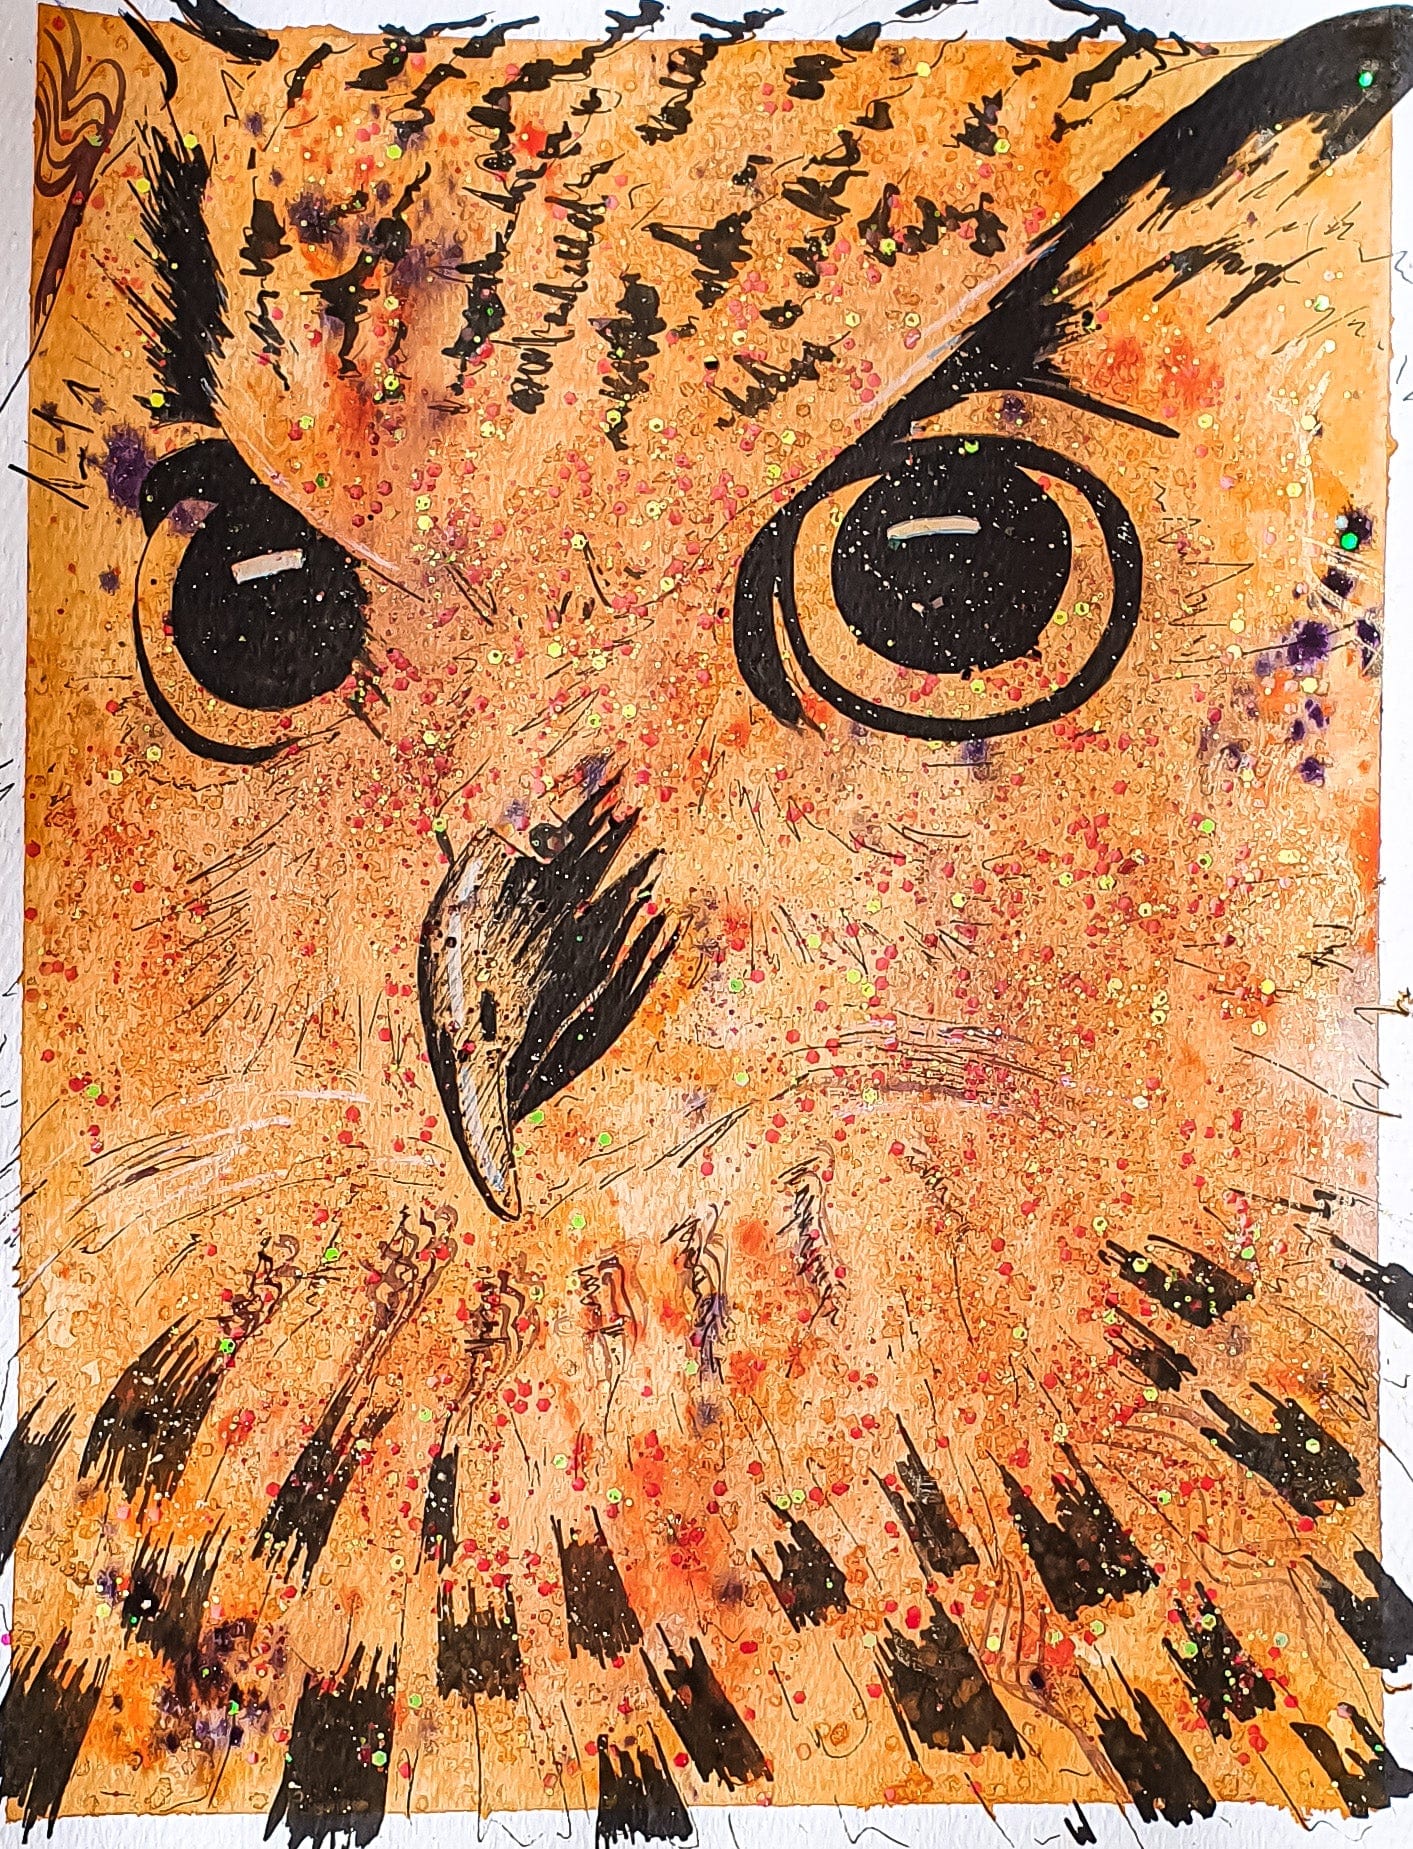 Danielle O'Reilly Art Pay in Full Day 58 - OWL Painting Artwork Wall decor Portrait Art Celebrity Canvas